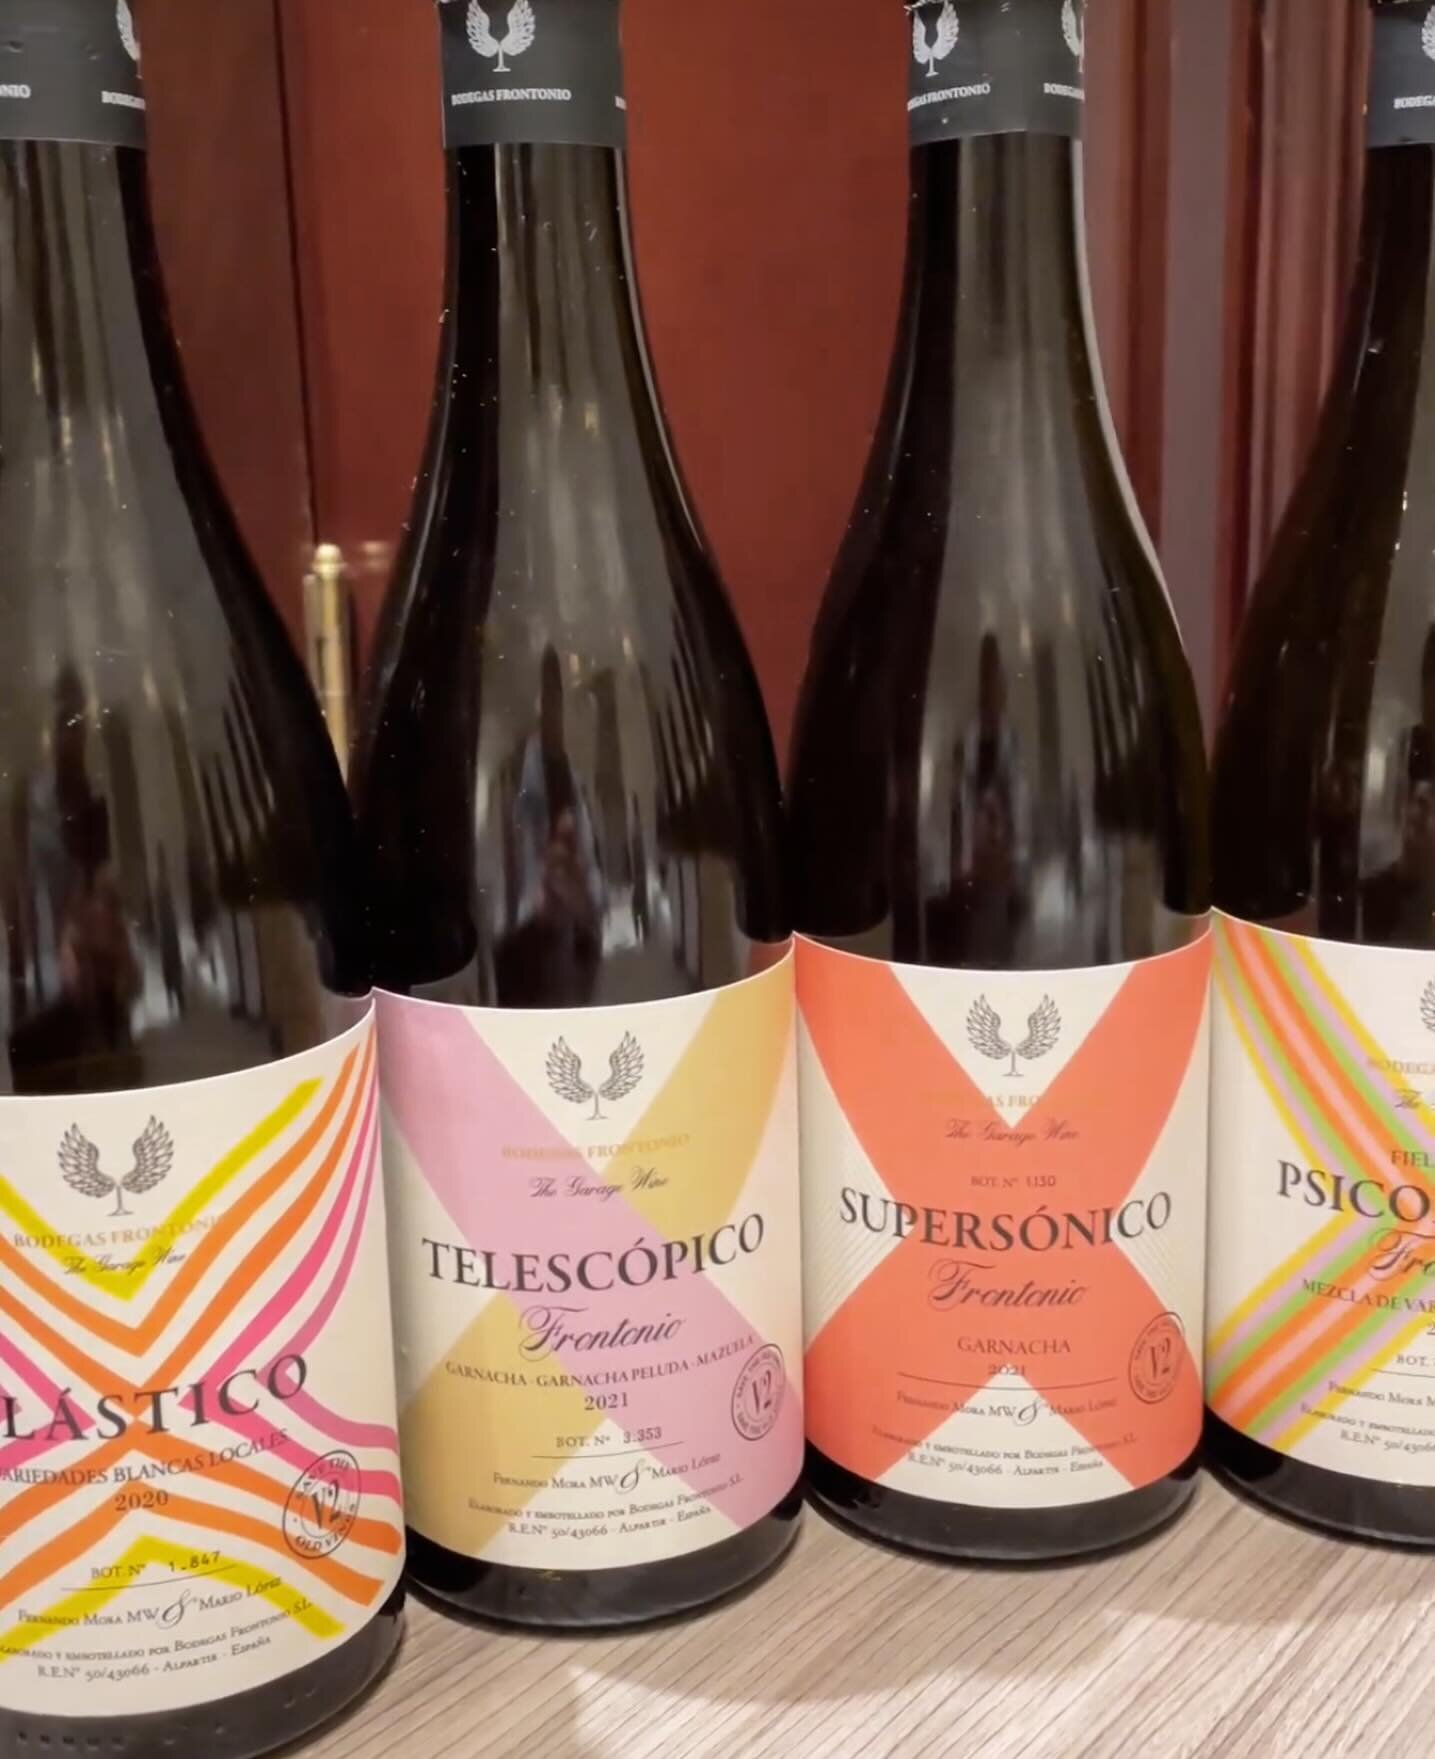 &ldquo;Mountain vines, a cave, and a dream: to bring back a tradition. We do not want rules; we trust our land, our grapes, and our senses. We are Bodegas Frontonio.&rdquo; @bodegasfrontonio 
&bull;
Check out these superb wines from Fernando Mora MW.